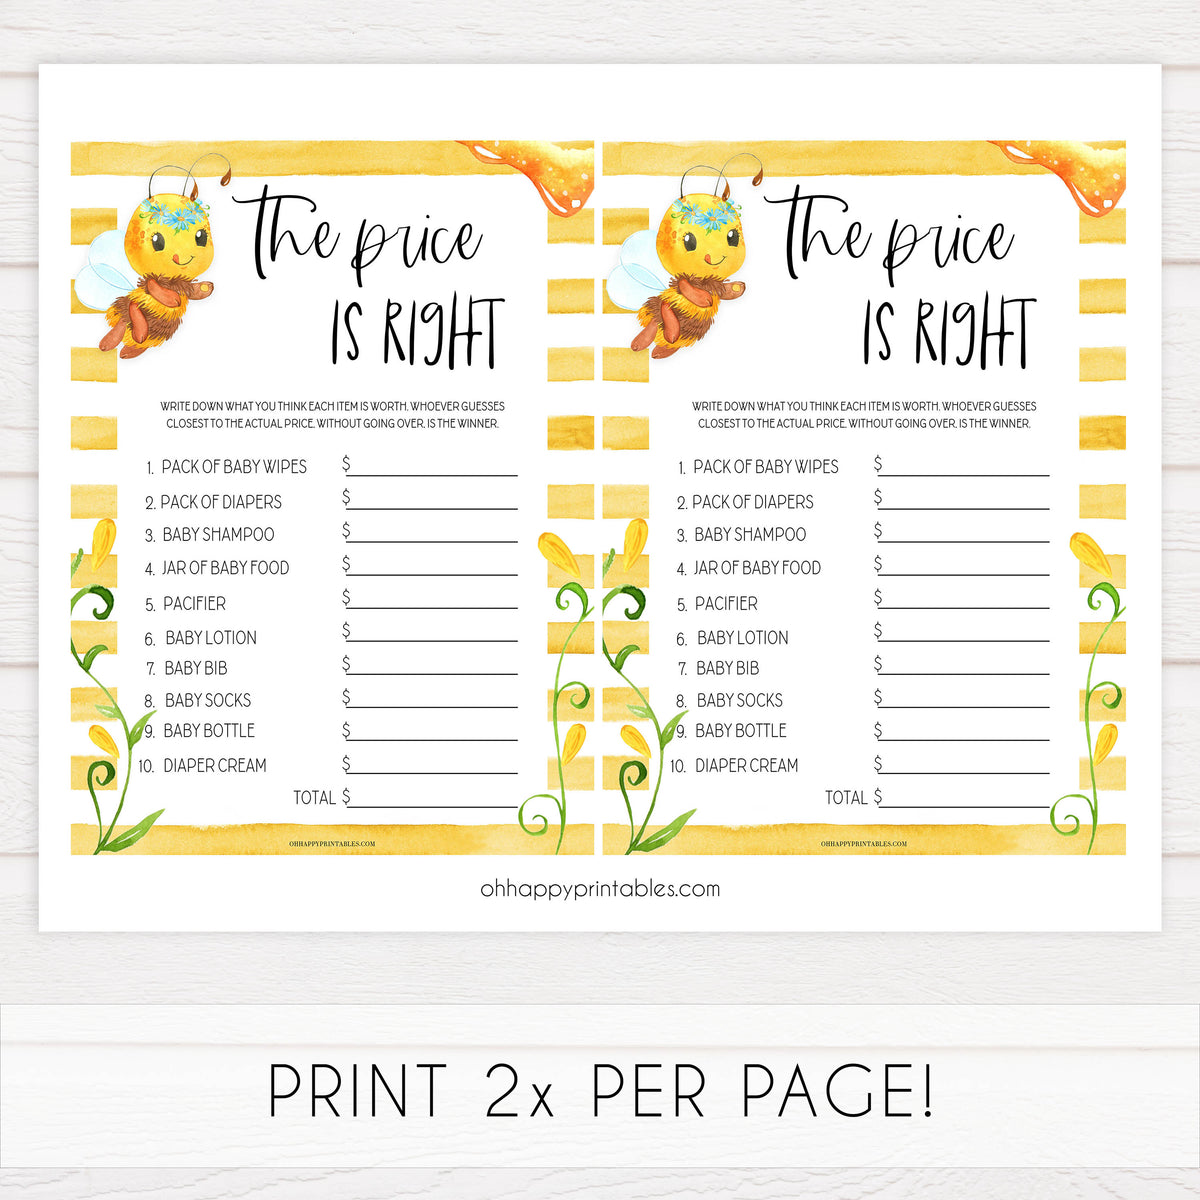 The Price is Right Game - Price is Right Printable Baby Games ...